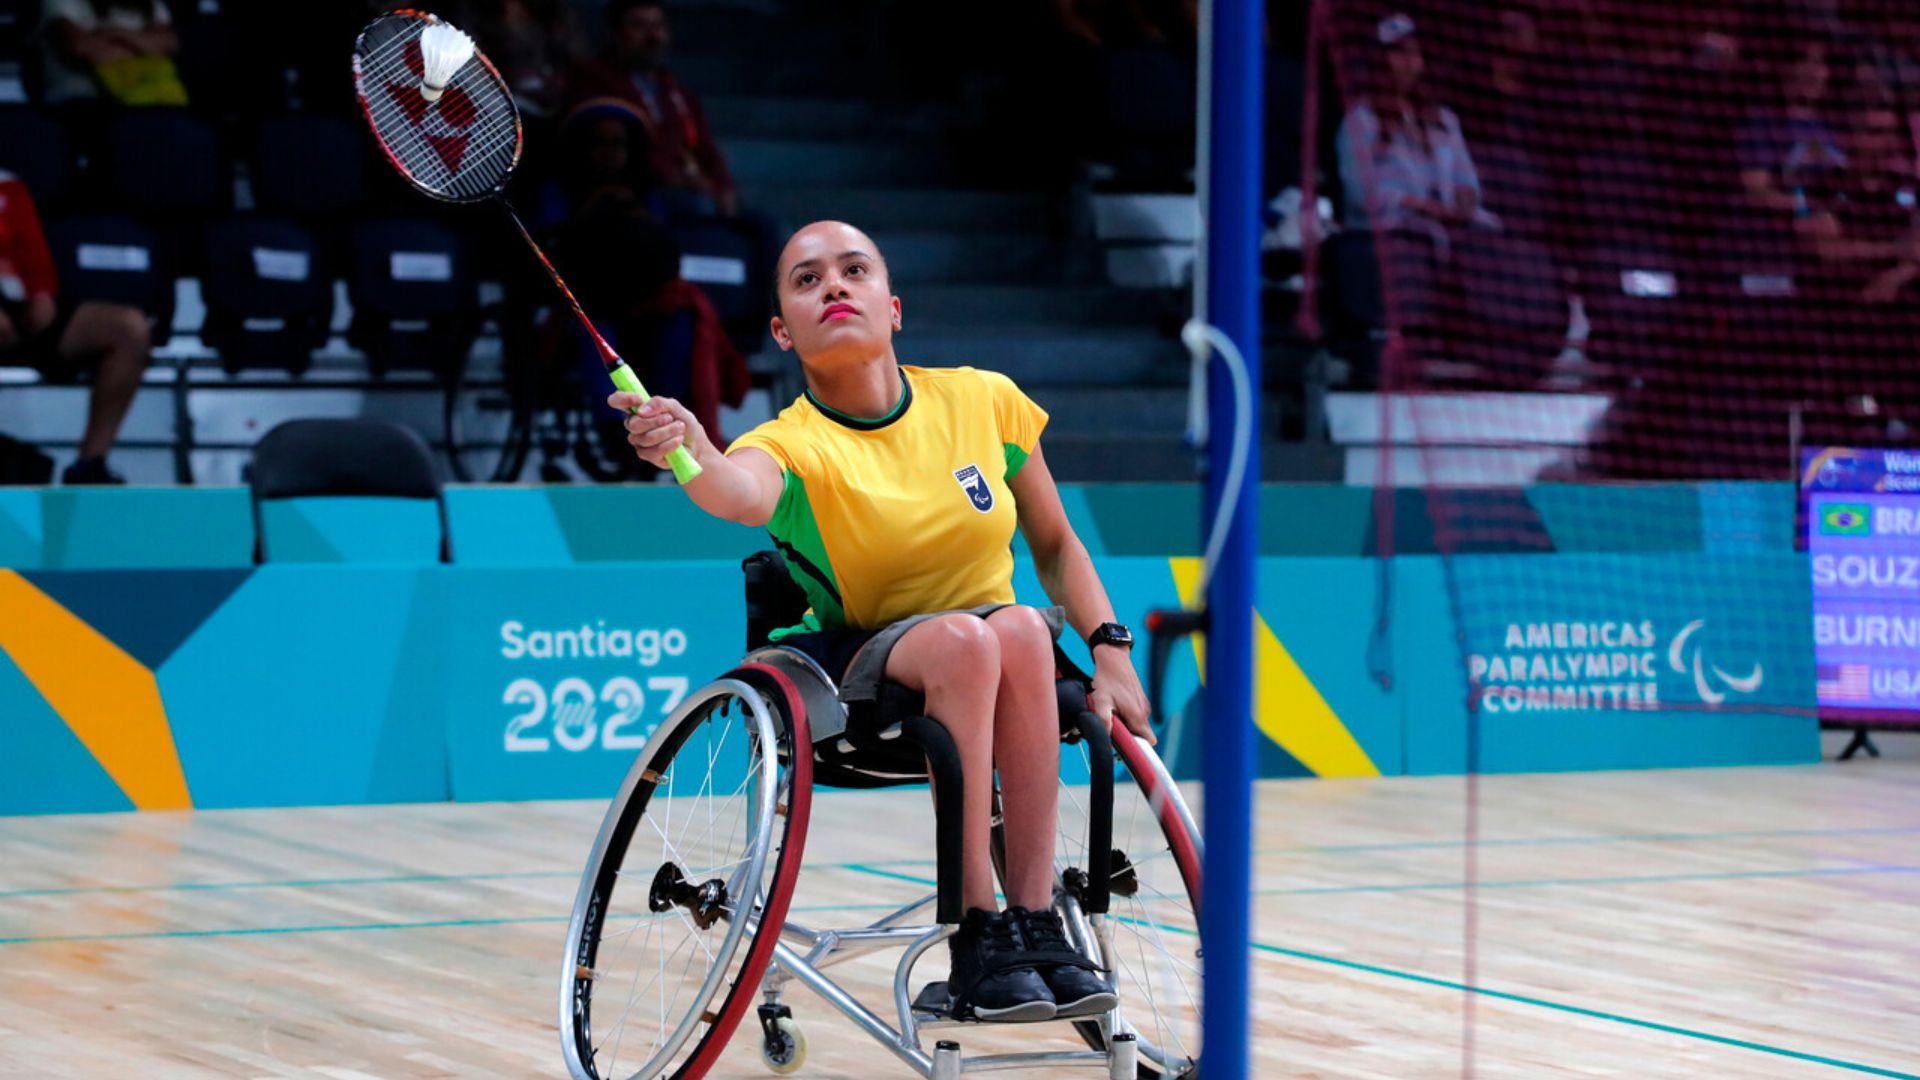 The First Gold for Brazil Arrives On the Last Day of Para Badminton